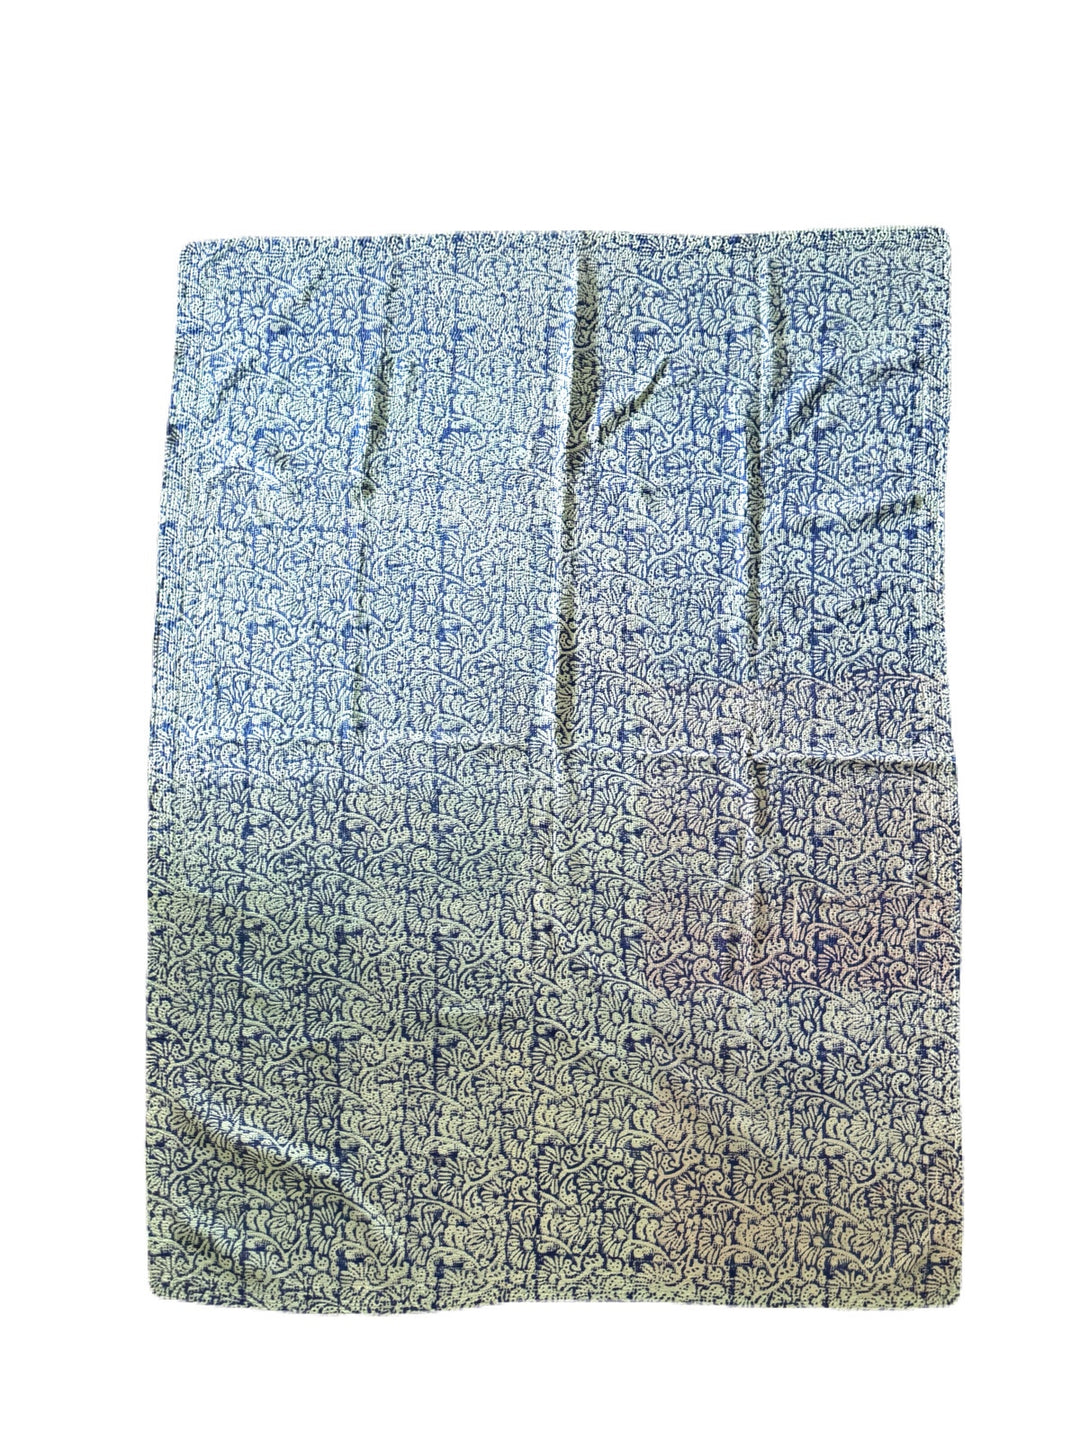 PRIME KANTHA QUILT - OUT TO SEA